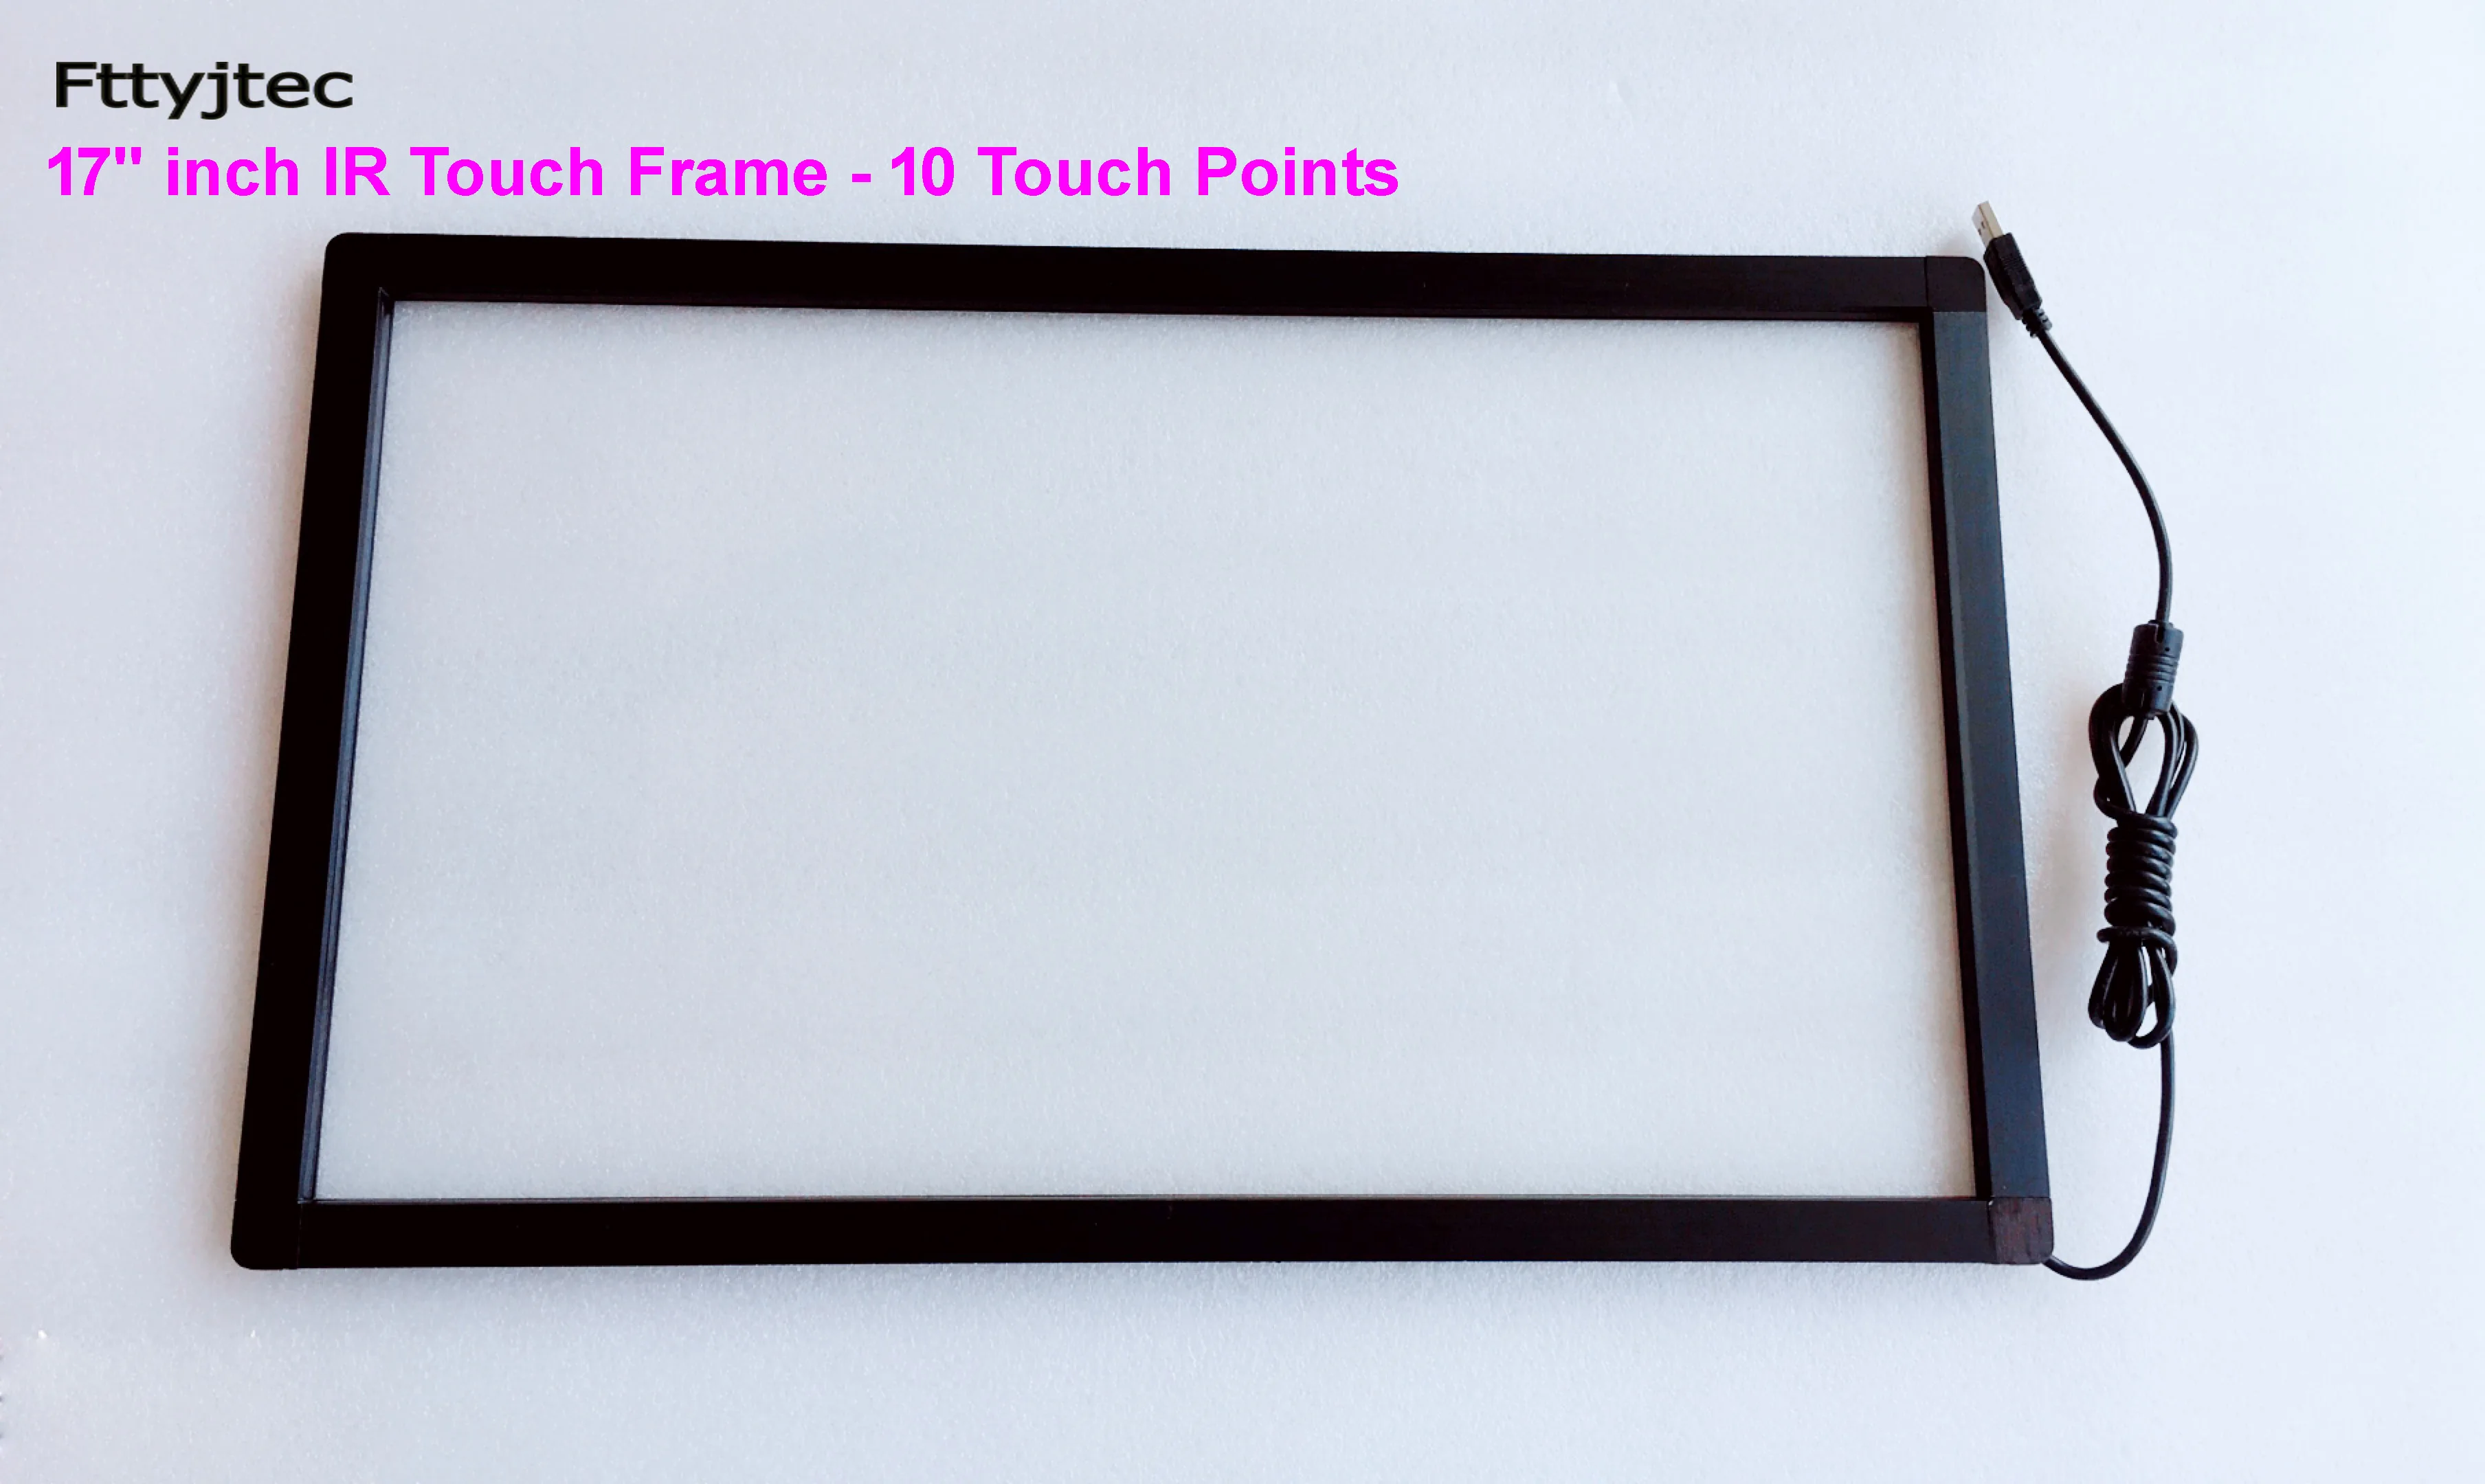 Fttyjtec 17 inch 16:10 IR touch frame 10 points infrared touch screen panel multi touchscreen overlay for monitor pc